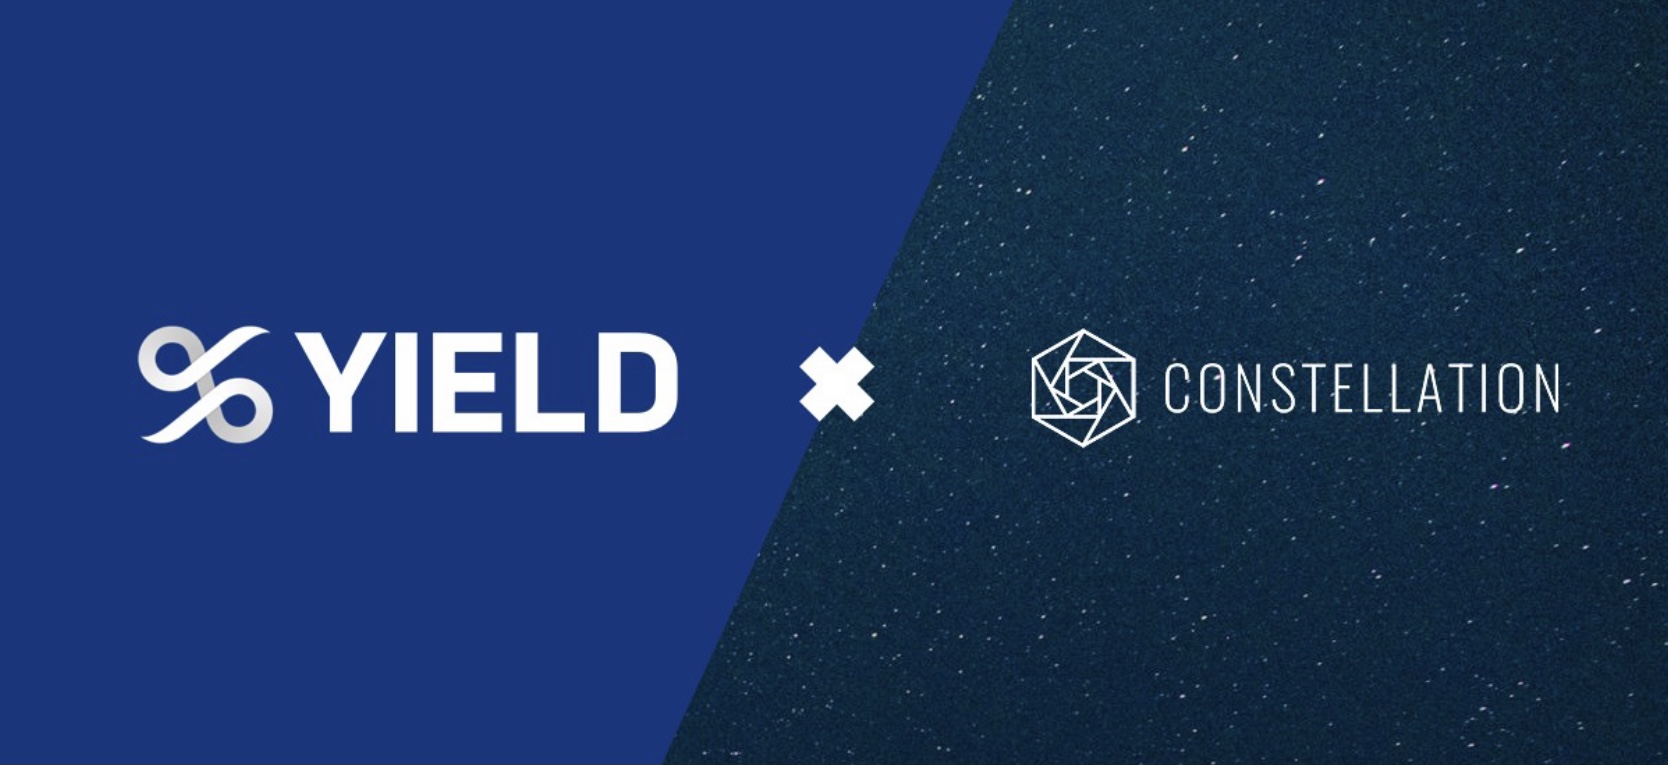 YIELD App partners with Constellation